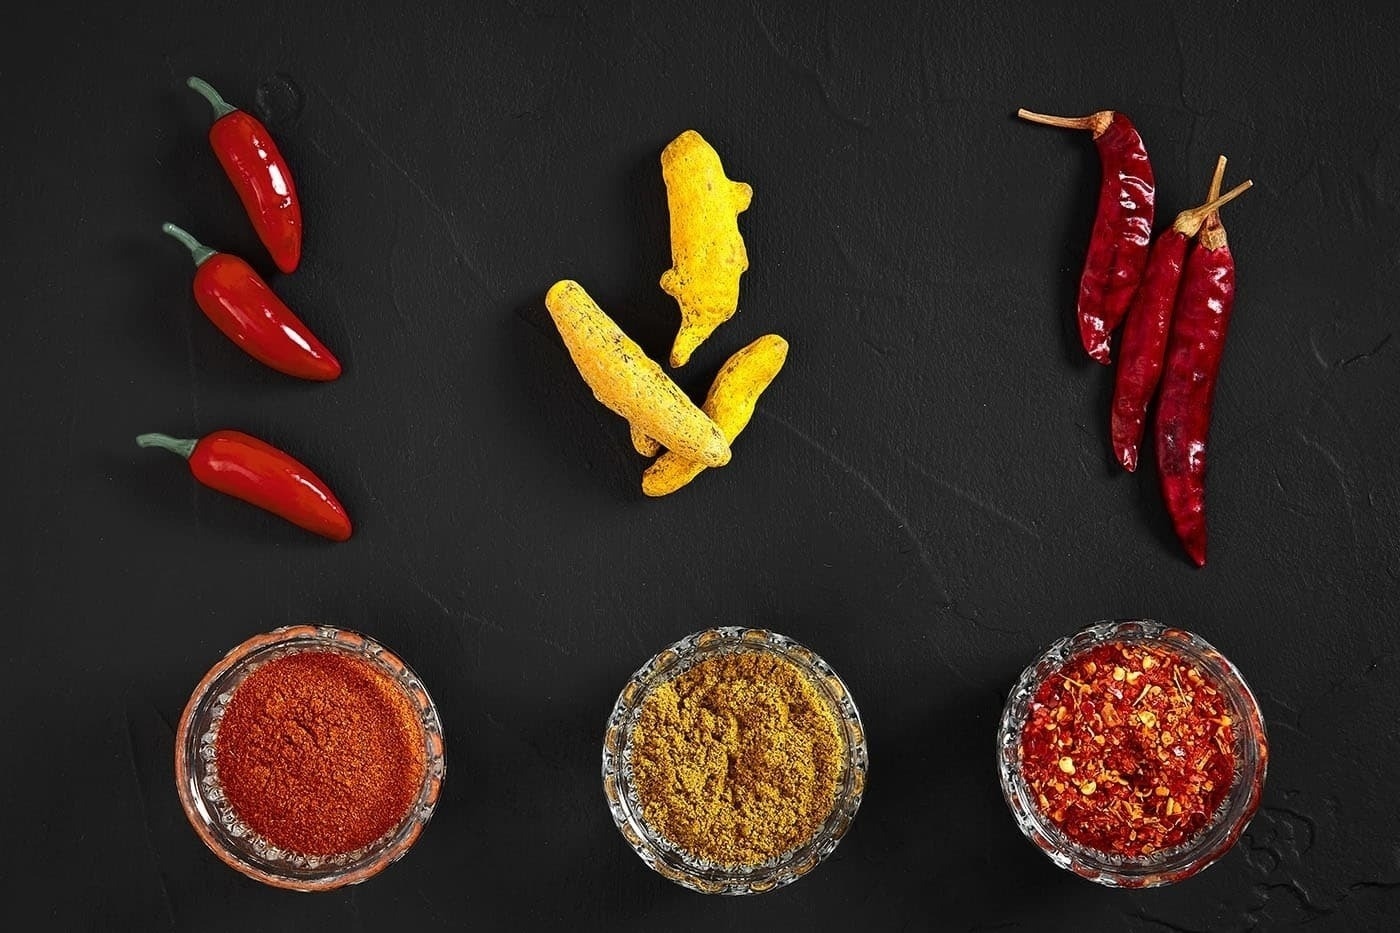 Let's celebrate spicy food day!